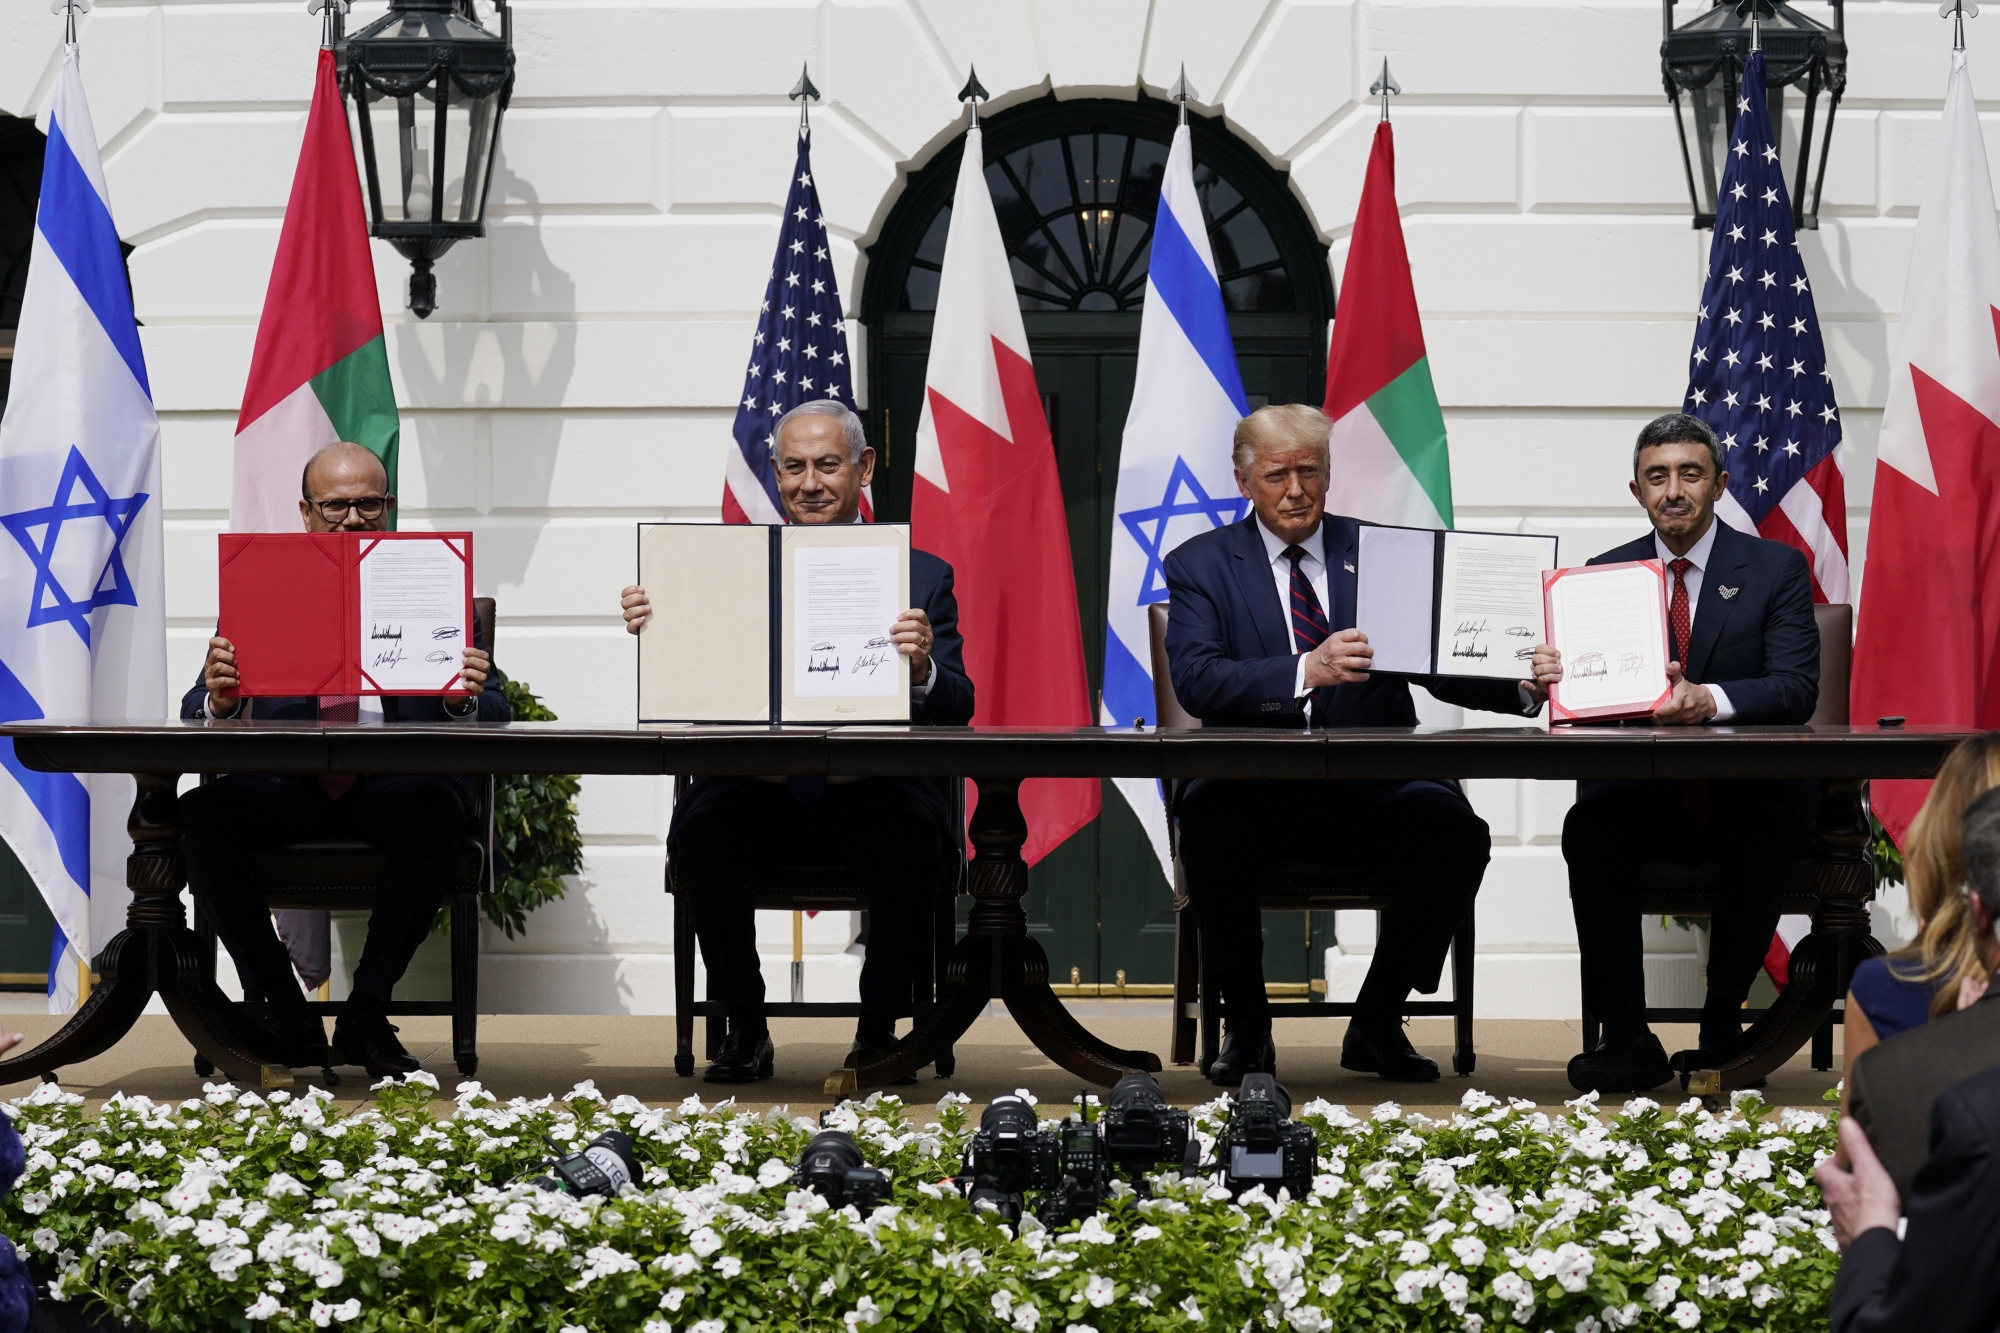 President Donald Trump, center, with from left, Bahrain Foreign Minister Khalid bin Ahmed Al Khalifa, Israeli Prime Minister Benjamin Netanyahu, Trump, and United Arab Emirates Foreign Minister Abdullah bin Zayed al-Nahyan, during the Abraham Accords signing ceremony on the South Lawn of the White House, Tuesday, Sept. 15, 2020, in Washington. (AP Photo/Alex Brandon) ArcInfo